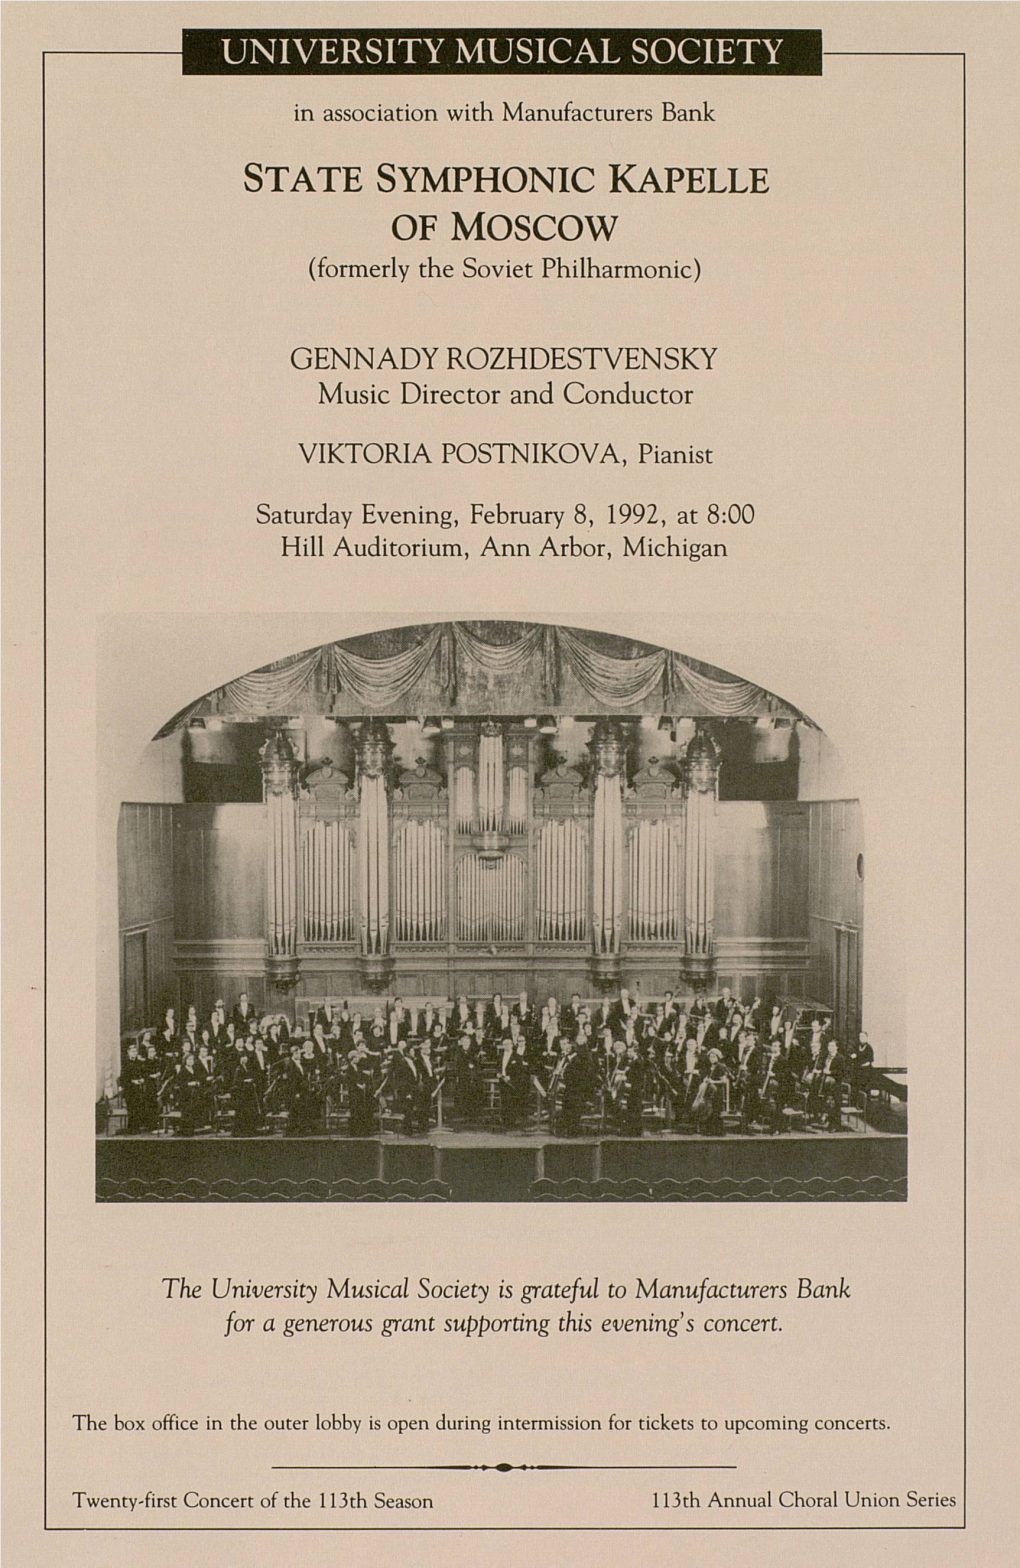 STATE SYMPHONIC KAPELLE of MOSCOW (Formerly the Soviet Philharmonic)